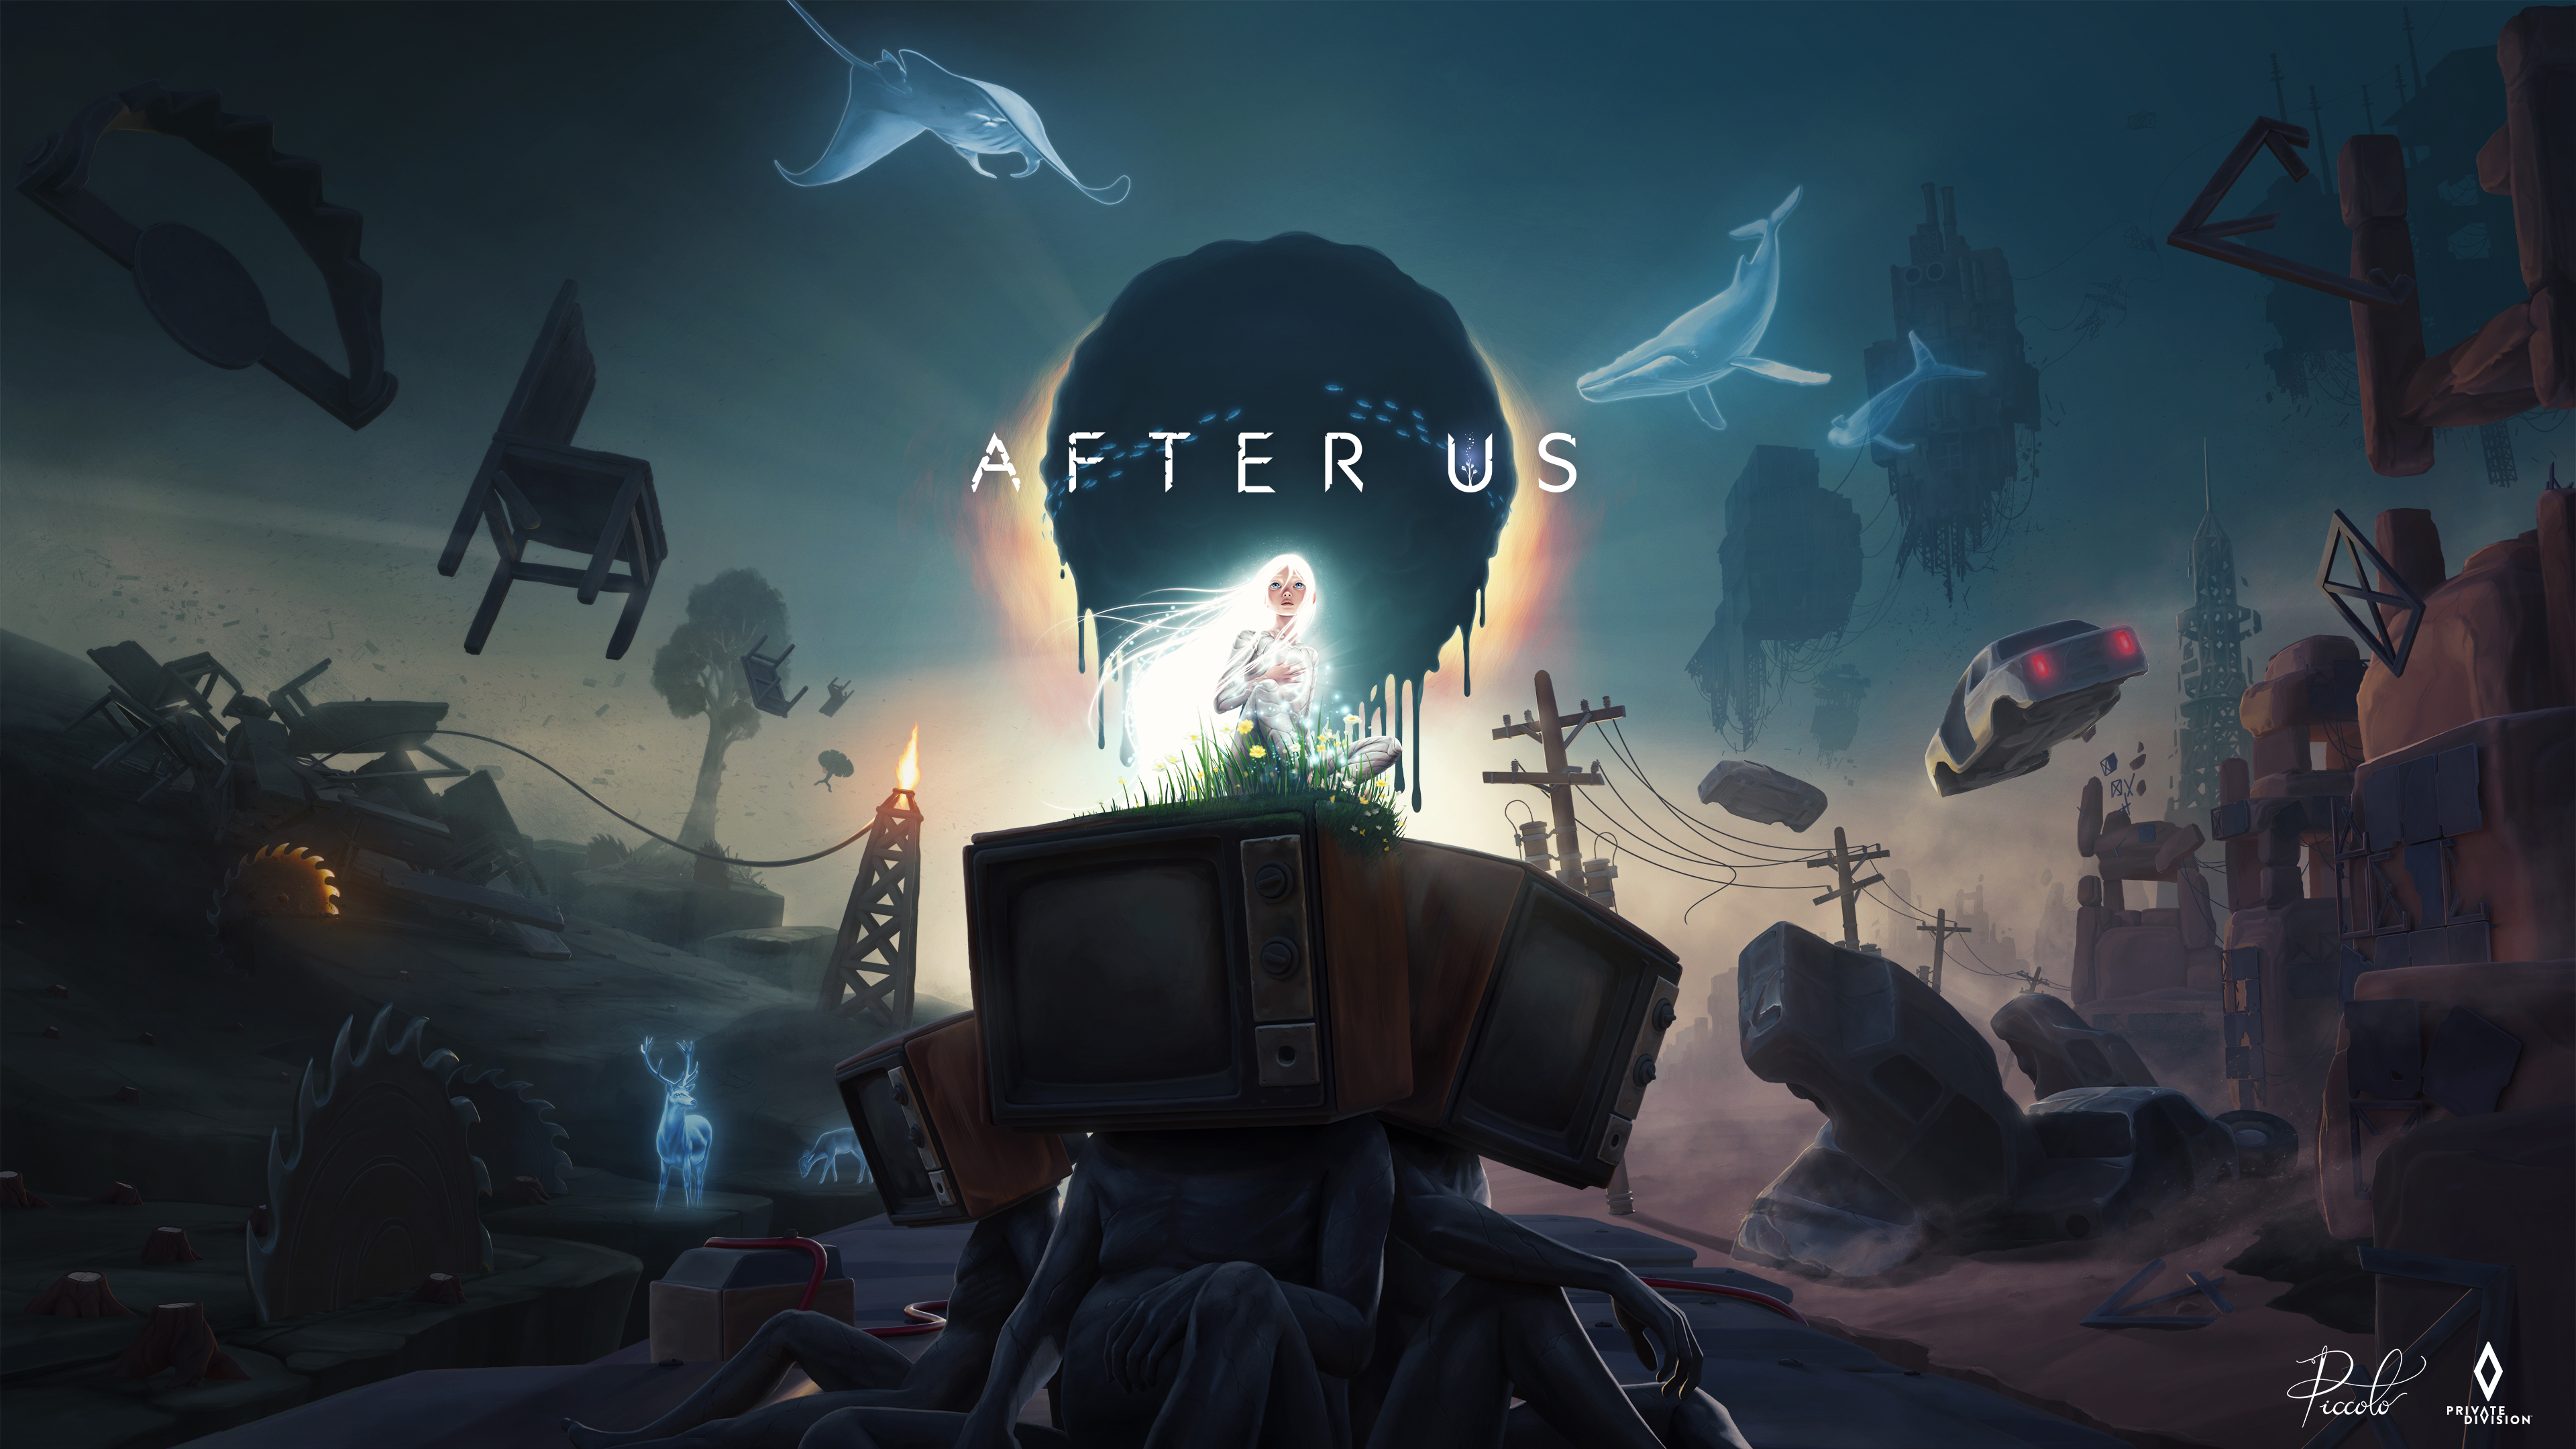 After Us Now Available for PC, PlayStation 5, and Xbox Series X, S